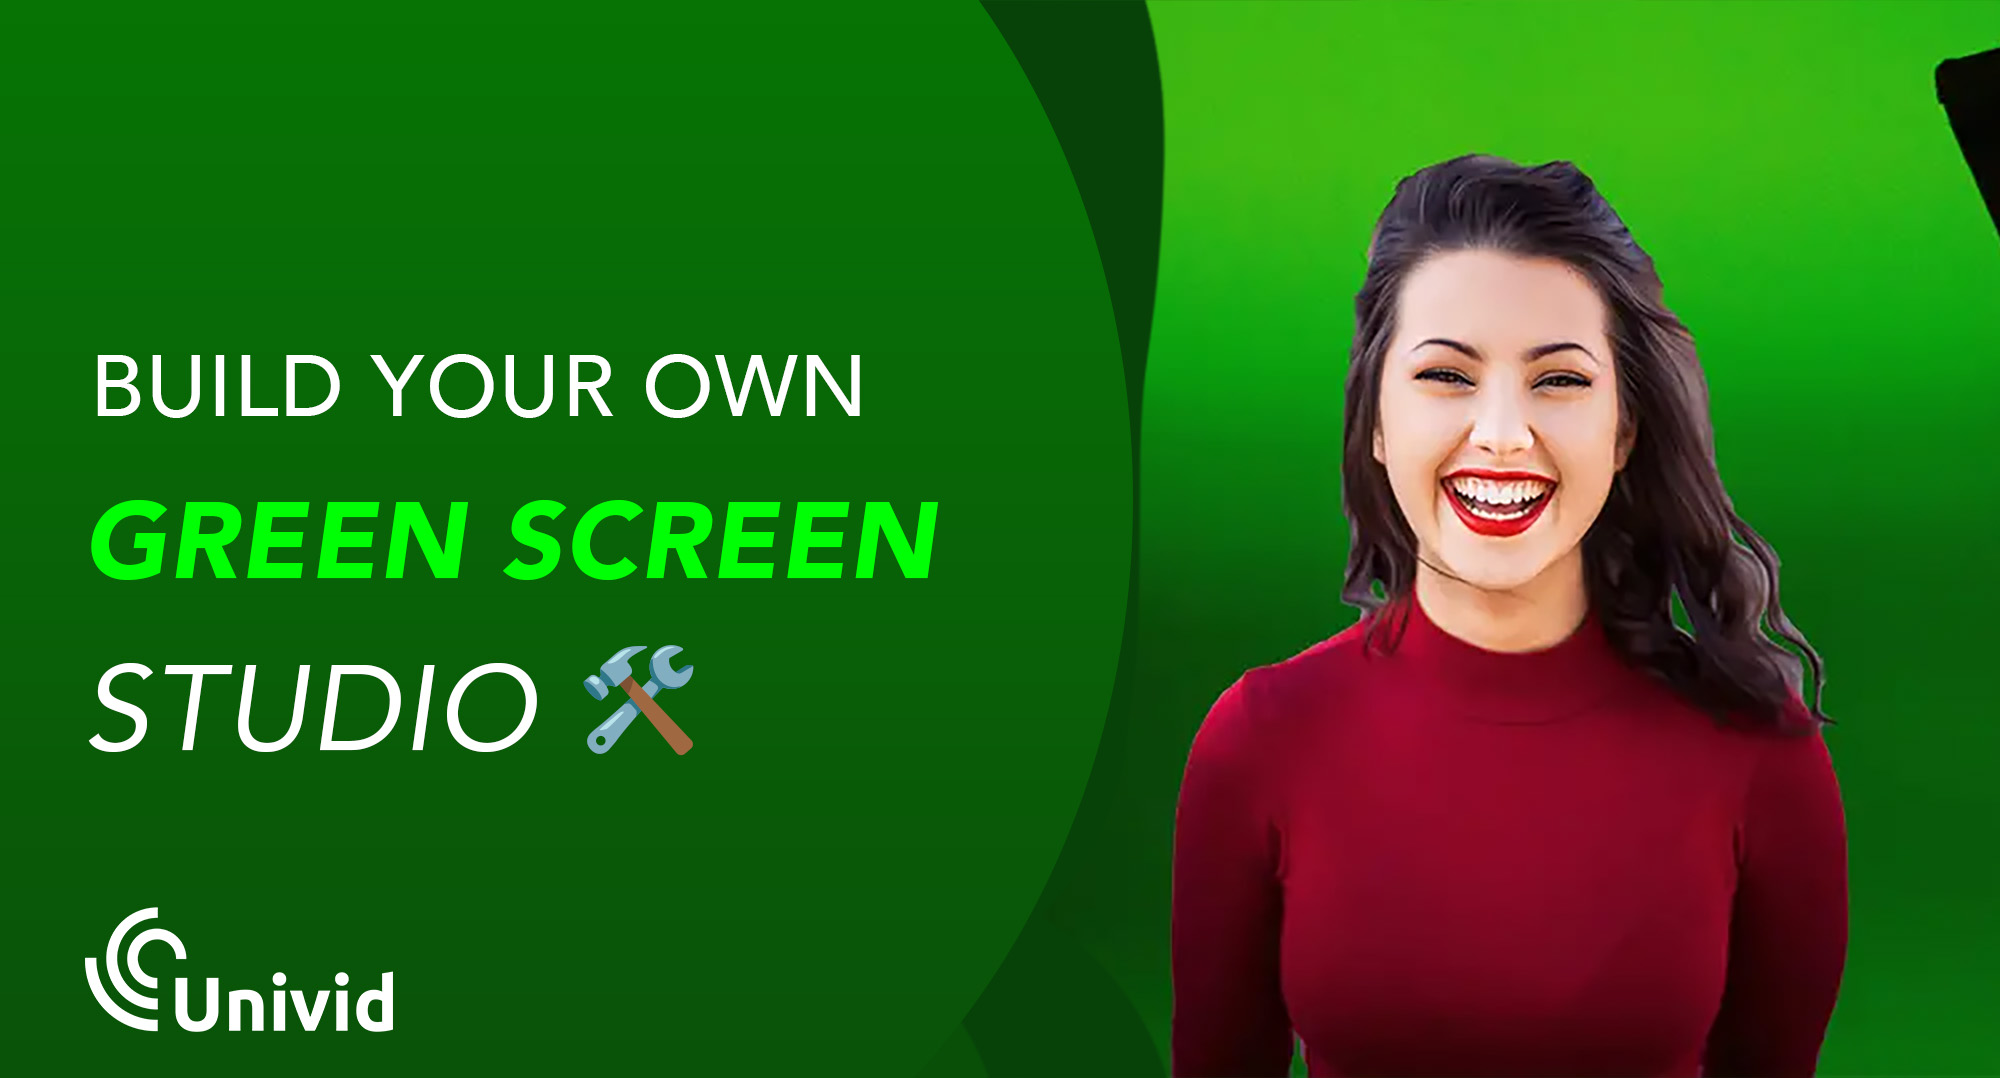 Building a green screen studio does not require more than a green fabric as a background and an app or application on your laptop. We go through what a green screen is and how it works to set up your own - either for your home or company office studio. You also get 5 tips on what to think of when live streaming with a virtual background.